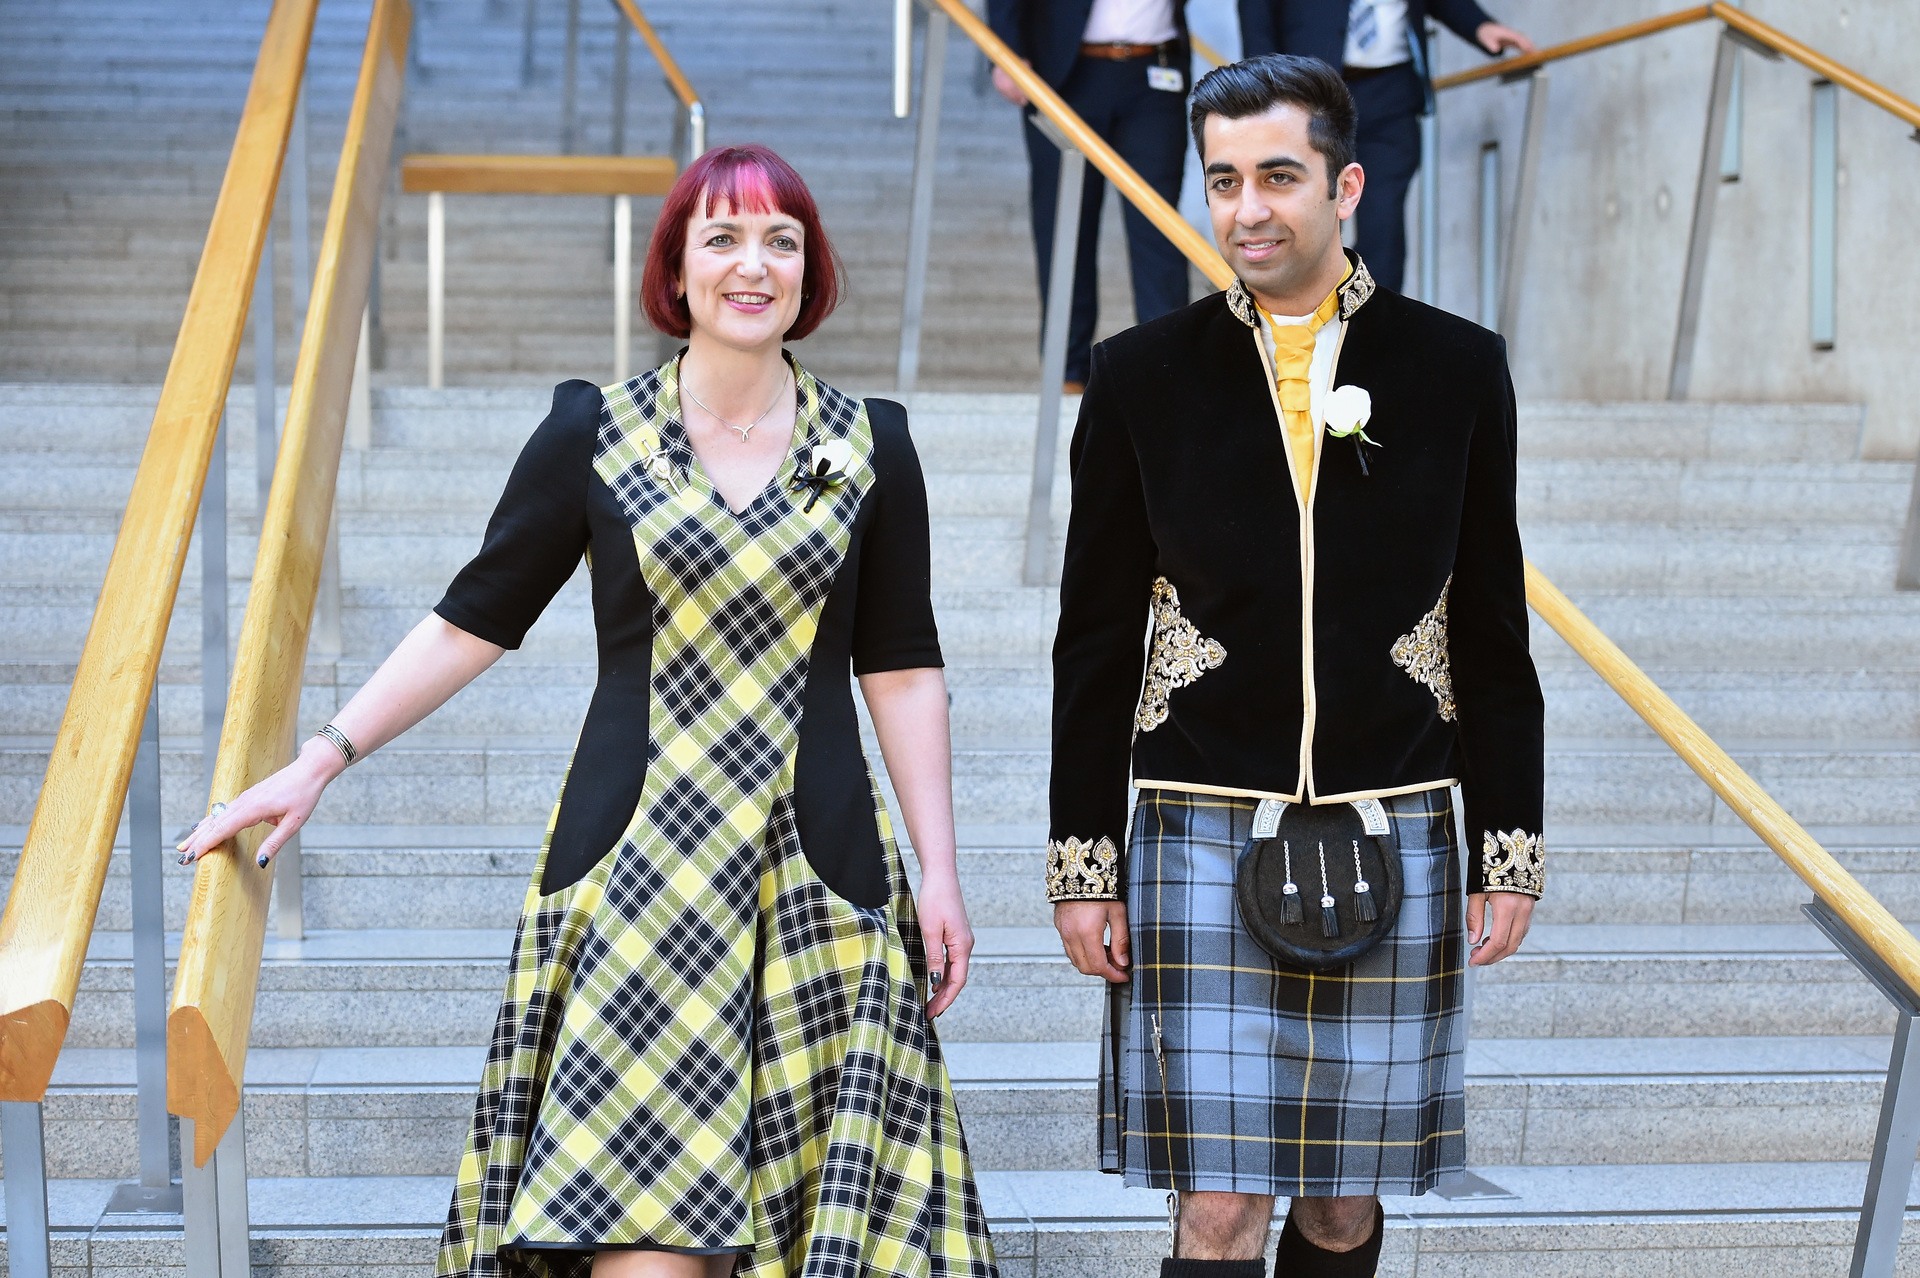 Angela Constance and Humza Yousaf of the SNP walk down the garden lobby steps after being sworn in at the Scottish Parliament for the fifth session of the Scottish Parliament on May 12, 2016.